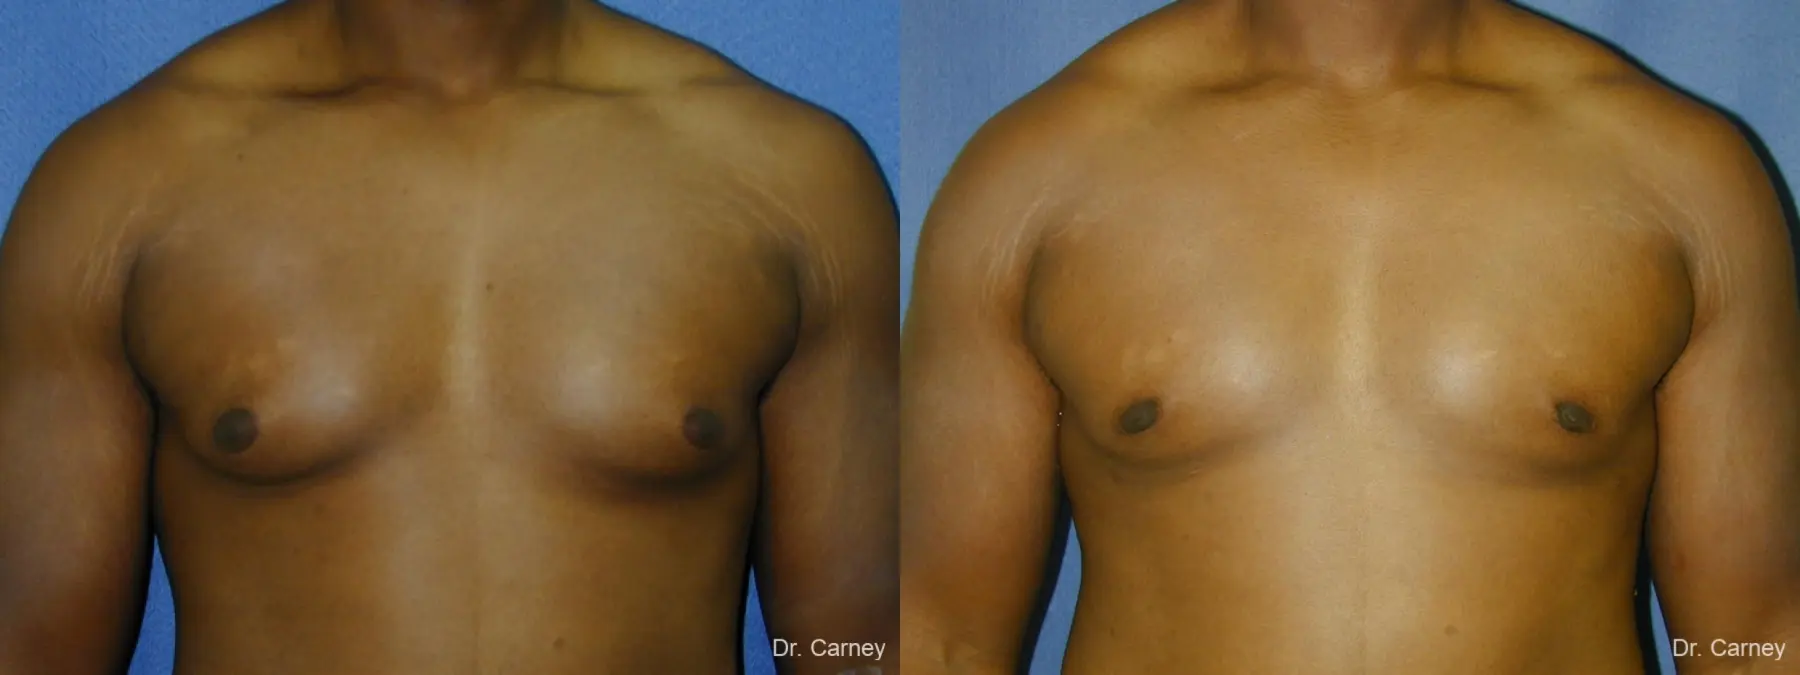 Virginia Beach Gynecomastia 1226 - Before and After 1